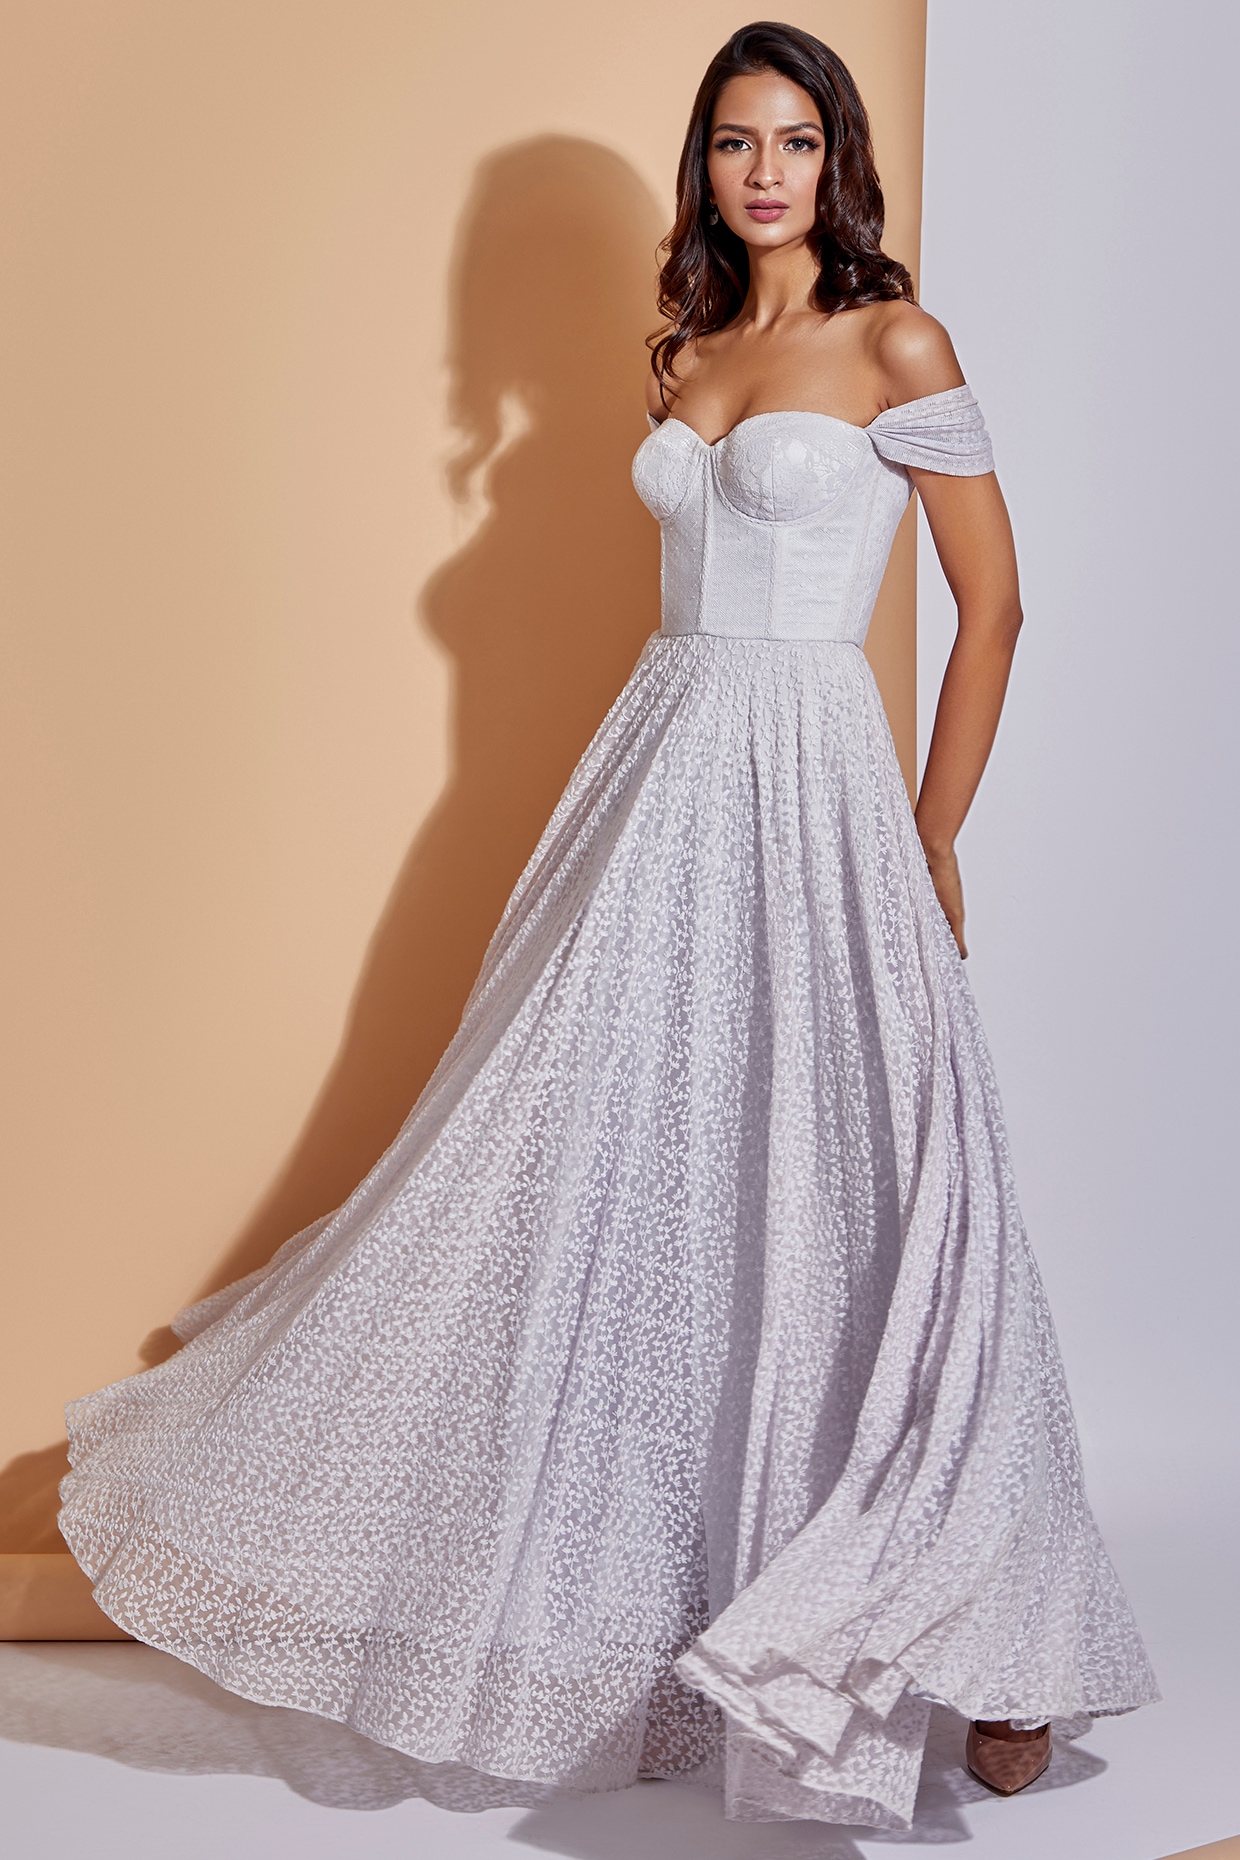 Asymmetric Cold Shoulder Style Party Gown